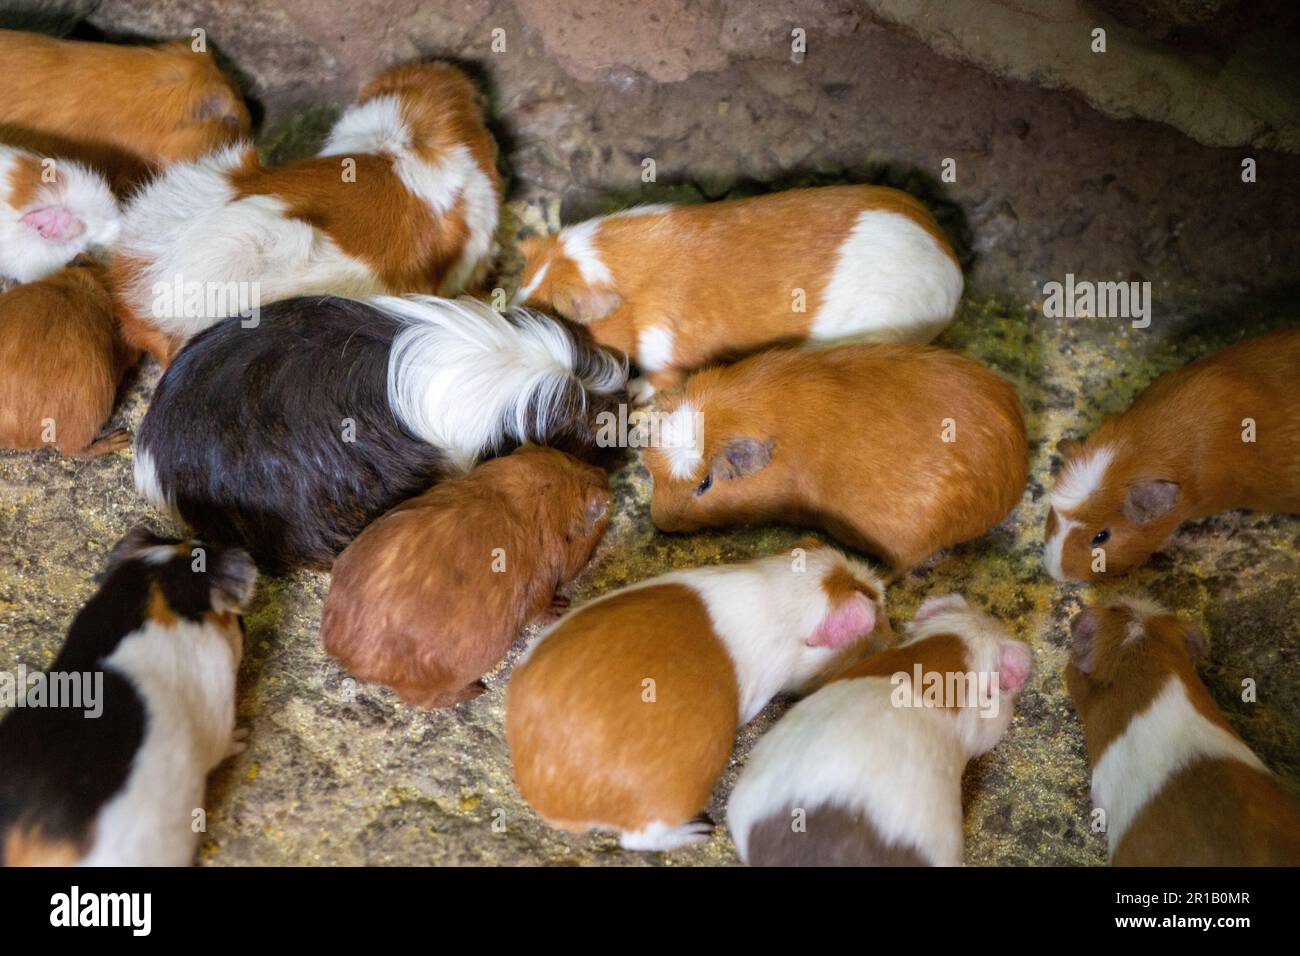 A bunch of guinea pigs or cuy waiting for dinner Stock Photo